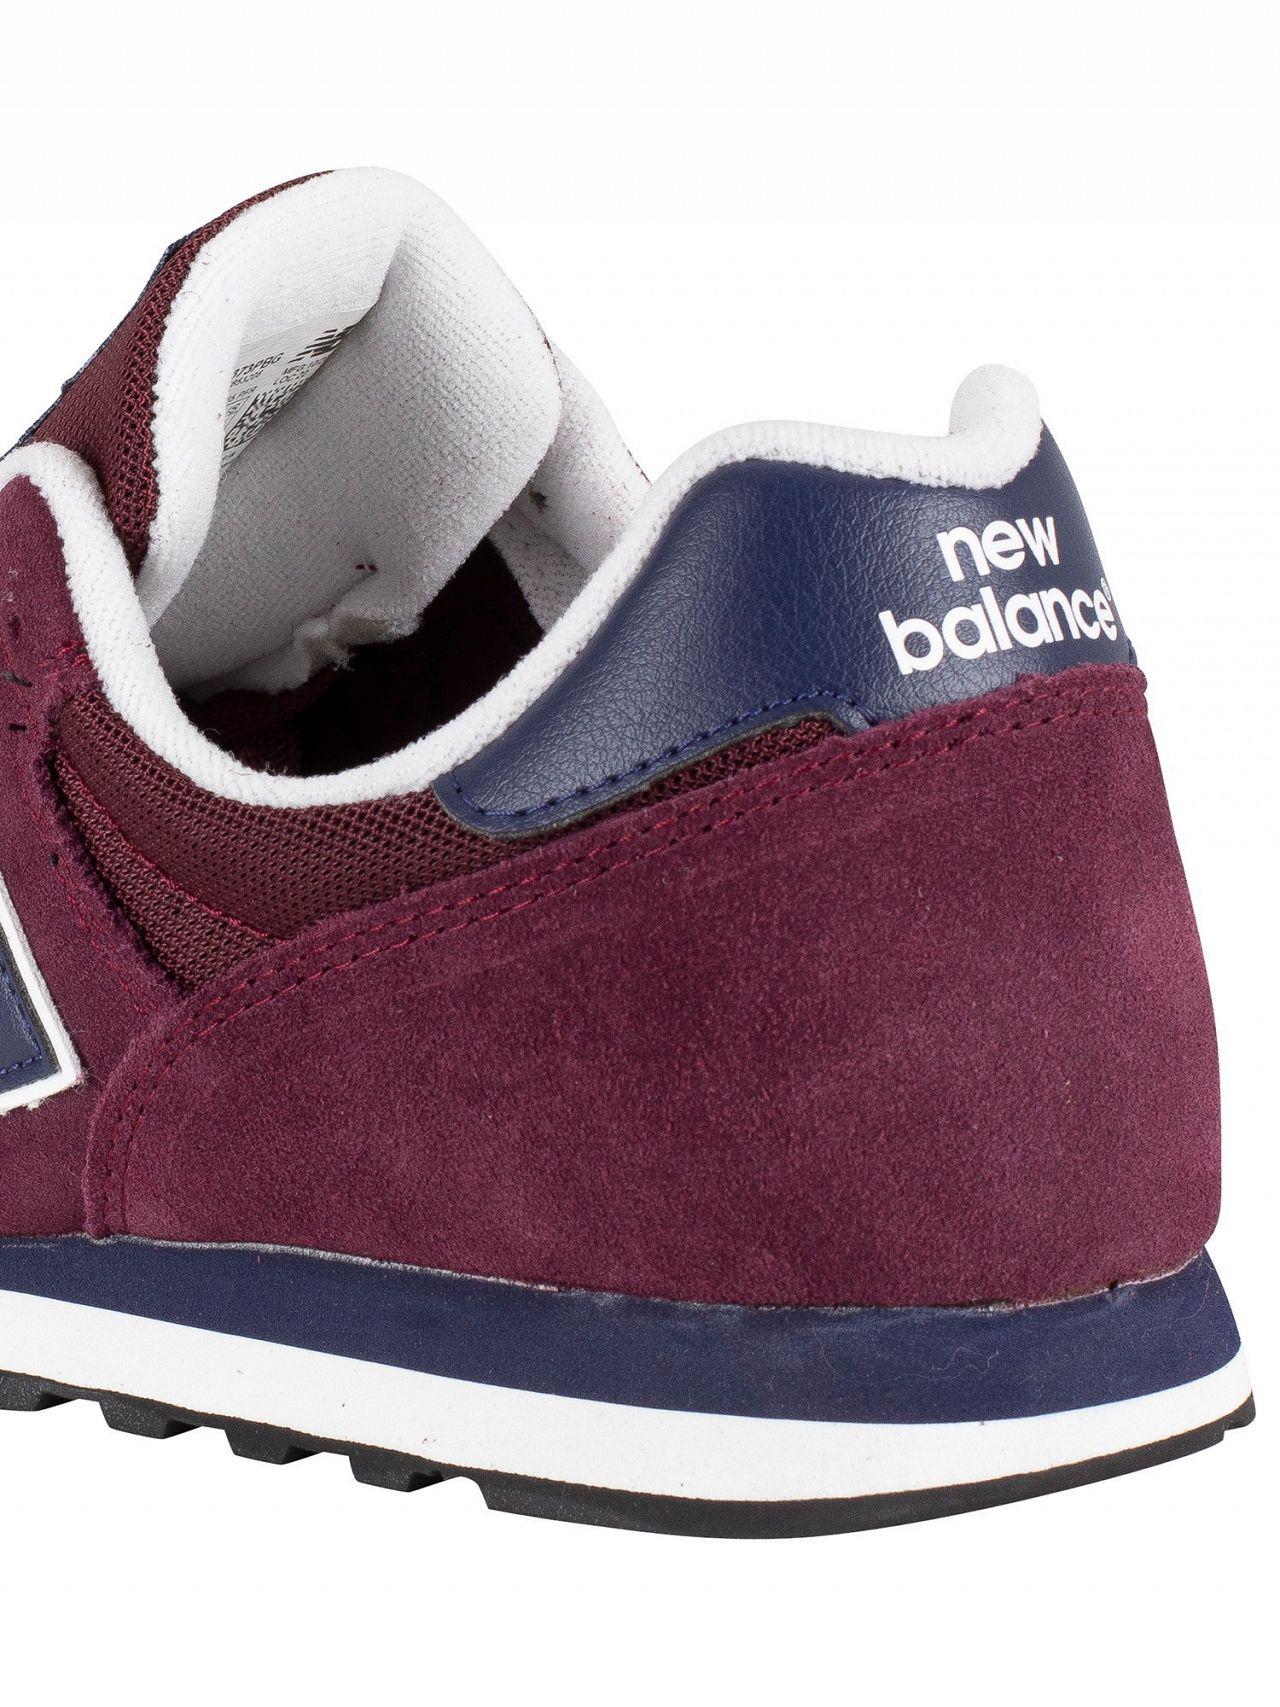 new balance burgundy 373 suede & mesh trainers